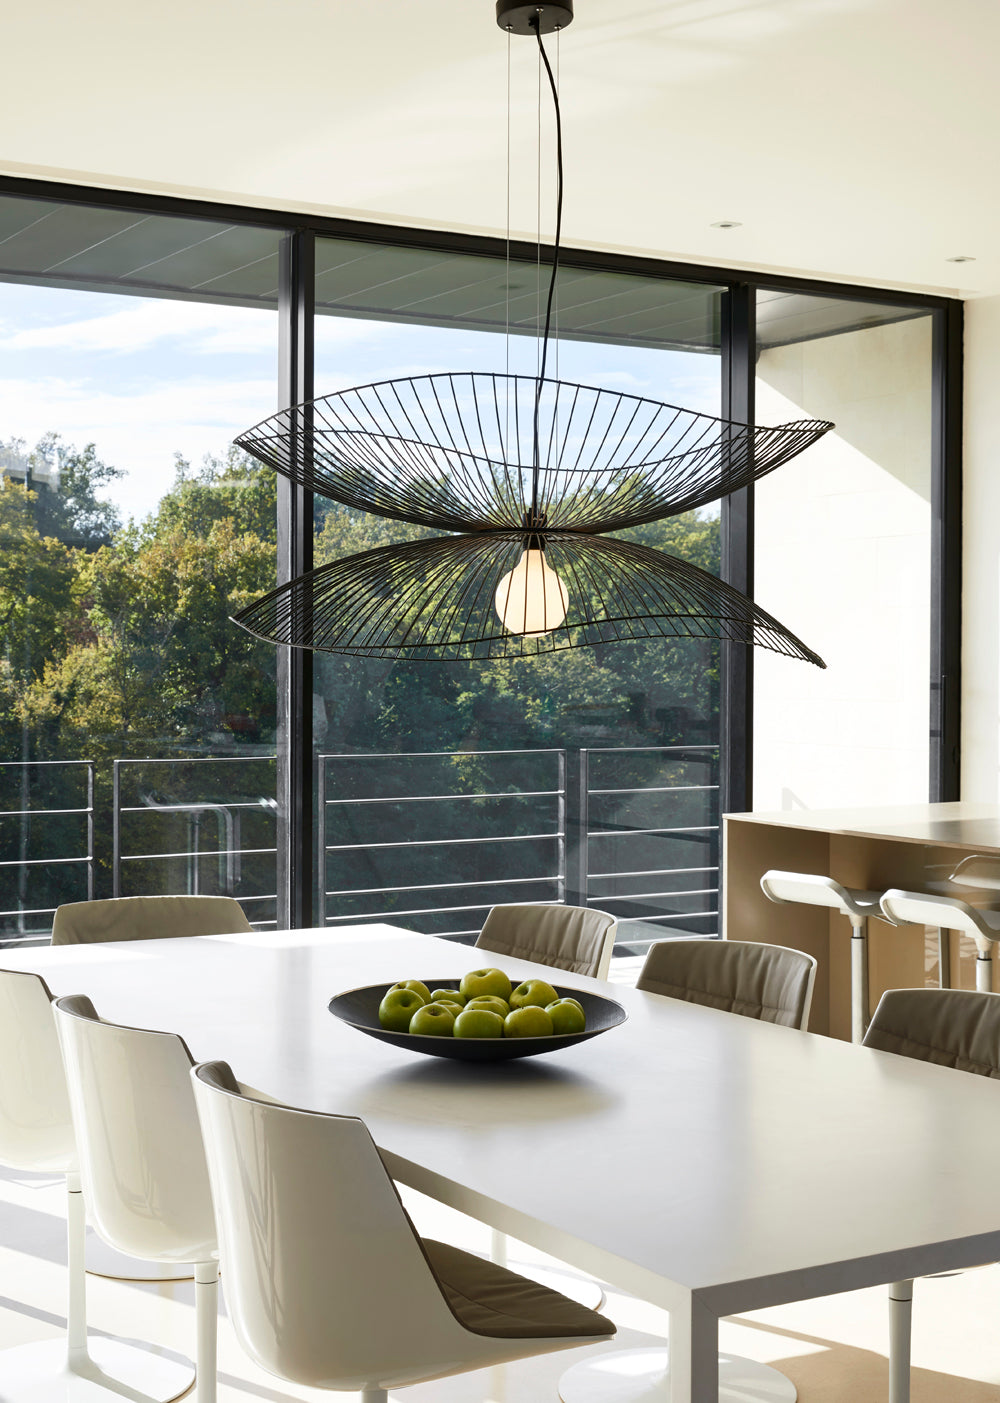 Libellule Small Pendant Light by Forestier